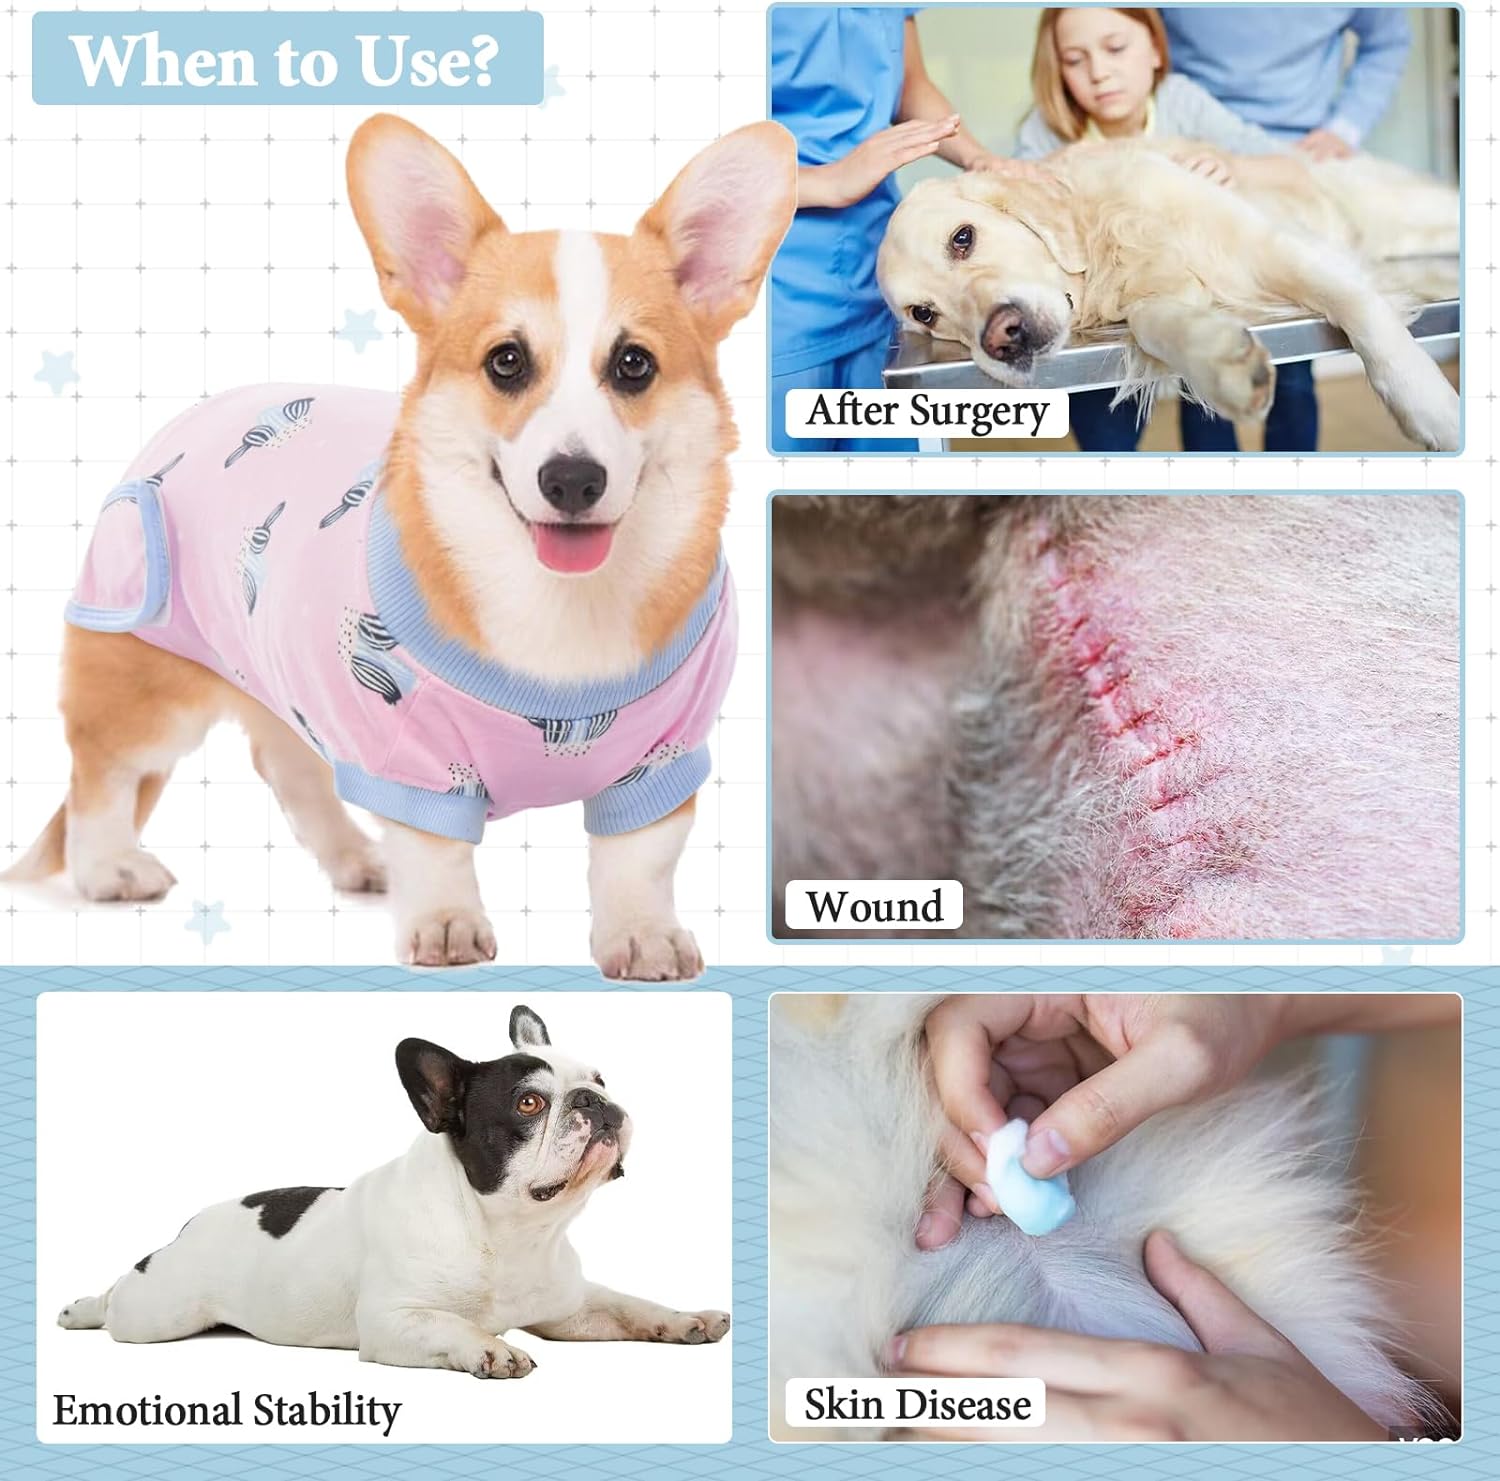 IDOMIK Dog Recovery Suit After Surgery,Breathable Dog Surgery Recovery Suit for Female Male Dogs Cats,Dog Surgical Onesie for Spay Neuter Surgery,E-Collar Cone Alternative Anti-Licking Abdominal Wound : Pet Supplies